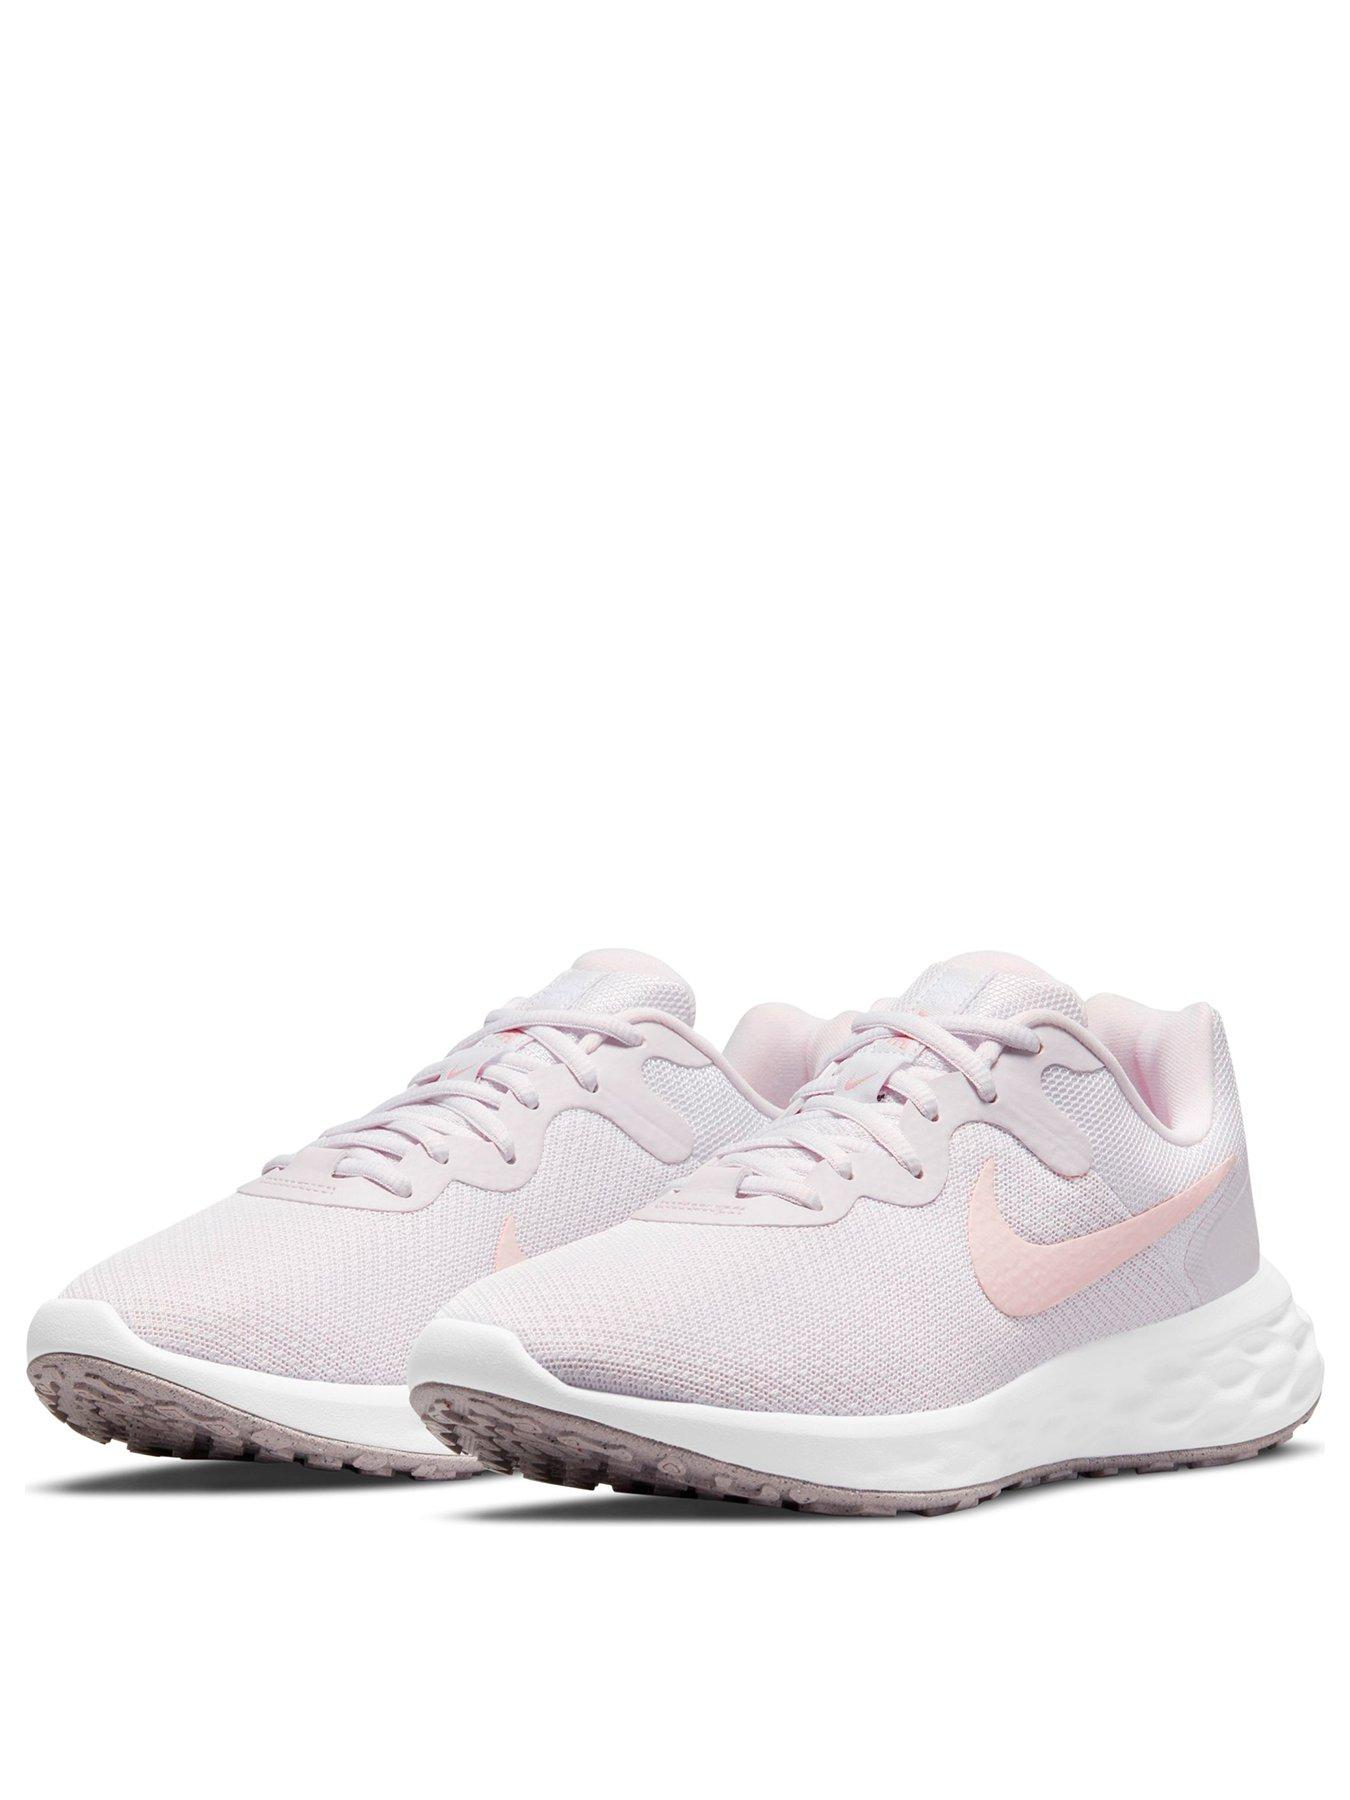 Trainers Revolution 6 -Pink/White